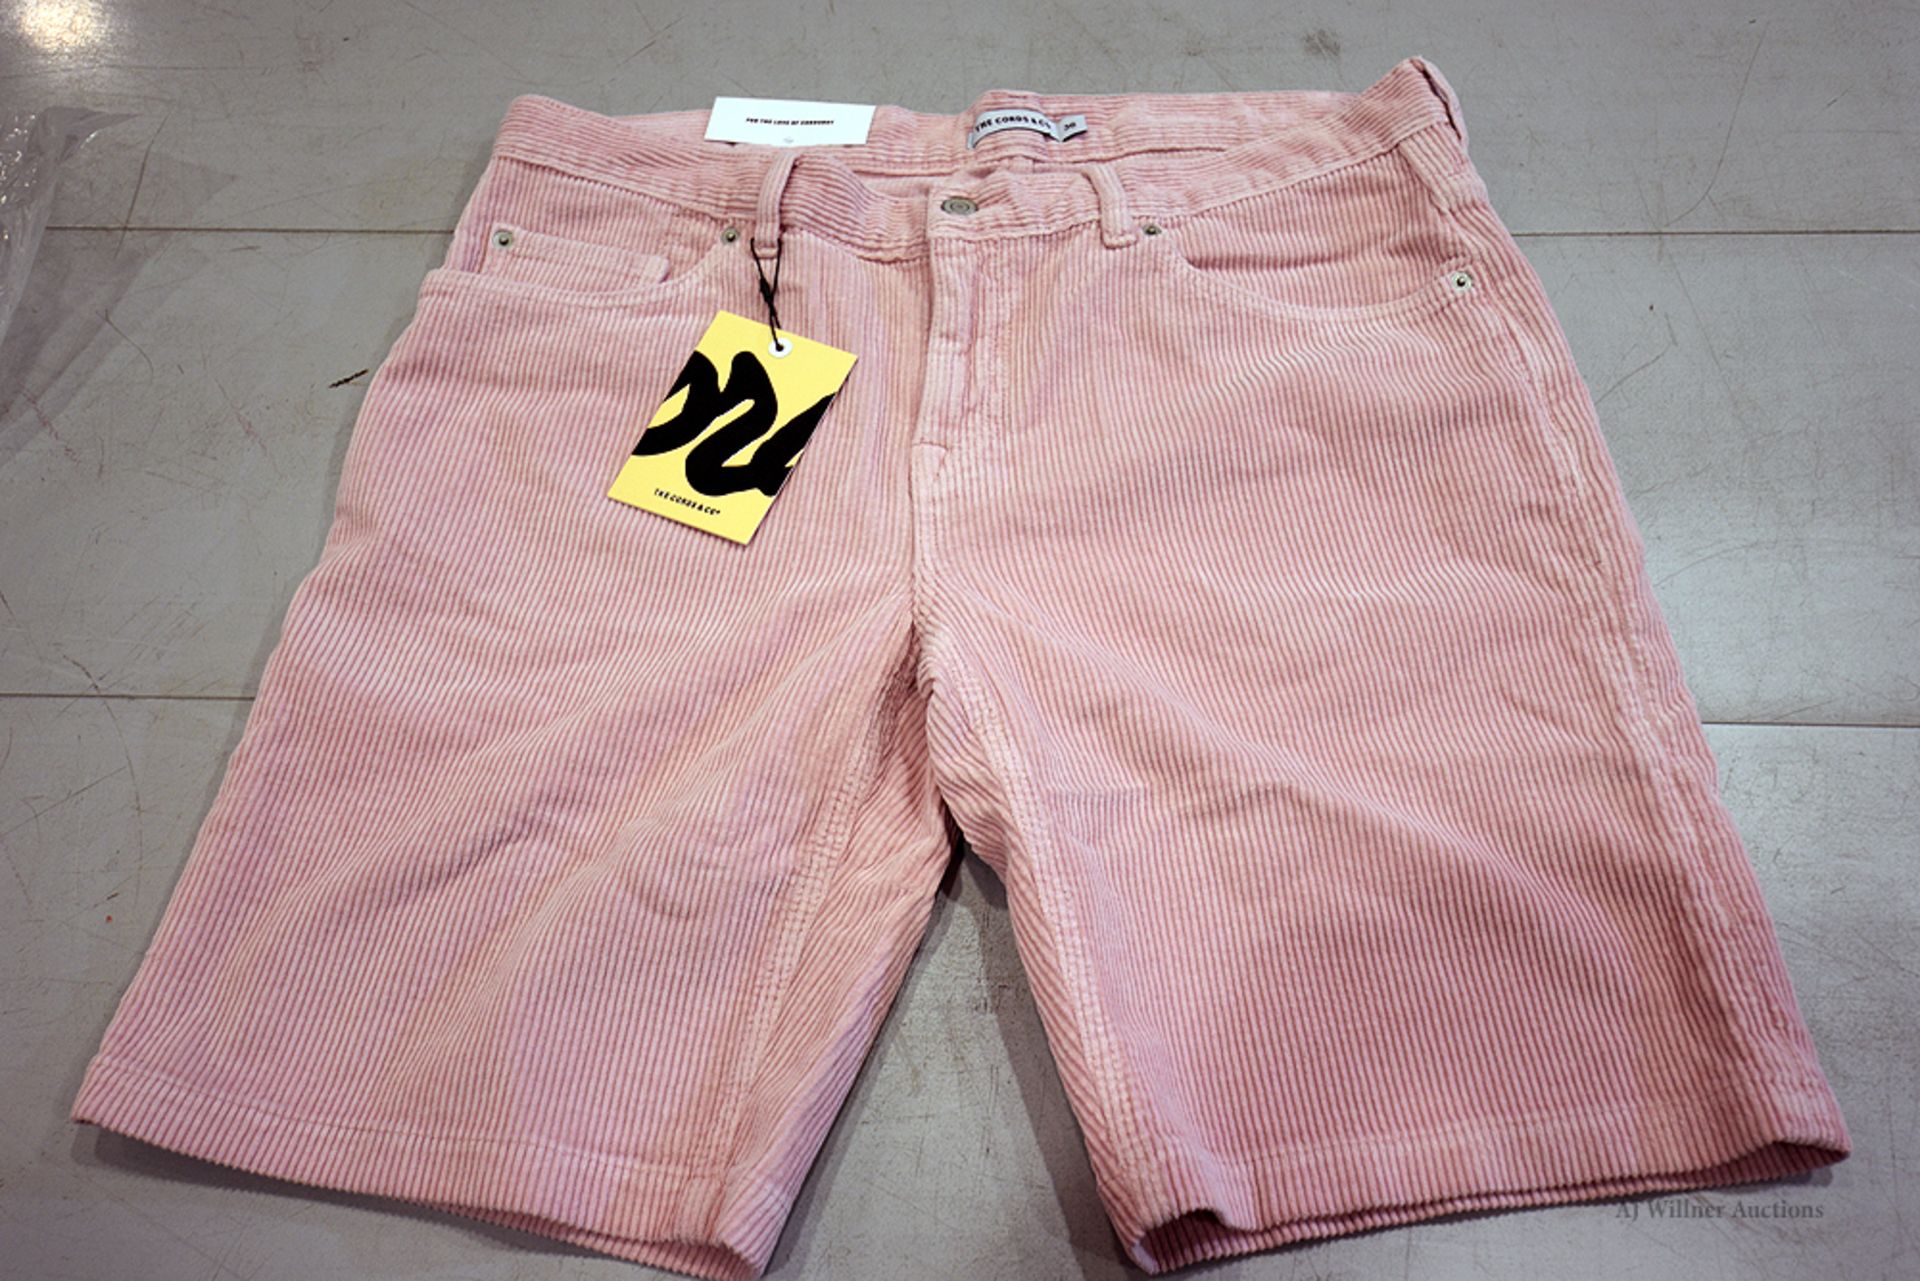 The Cords & Co. "Adam" Style Men's/ 5-Pocket/ Mid-Waist/ Classic Fit/ Shorts (Blush)